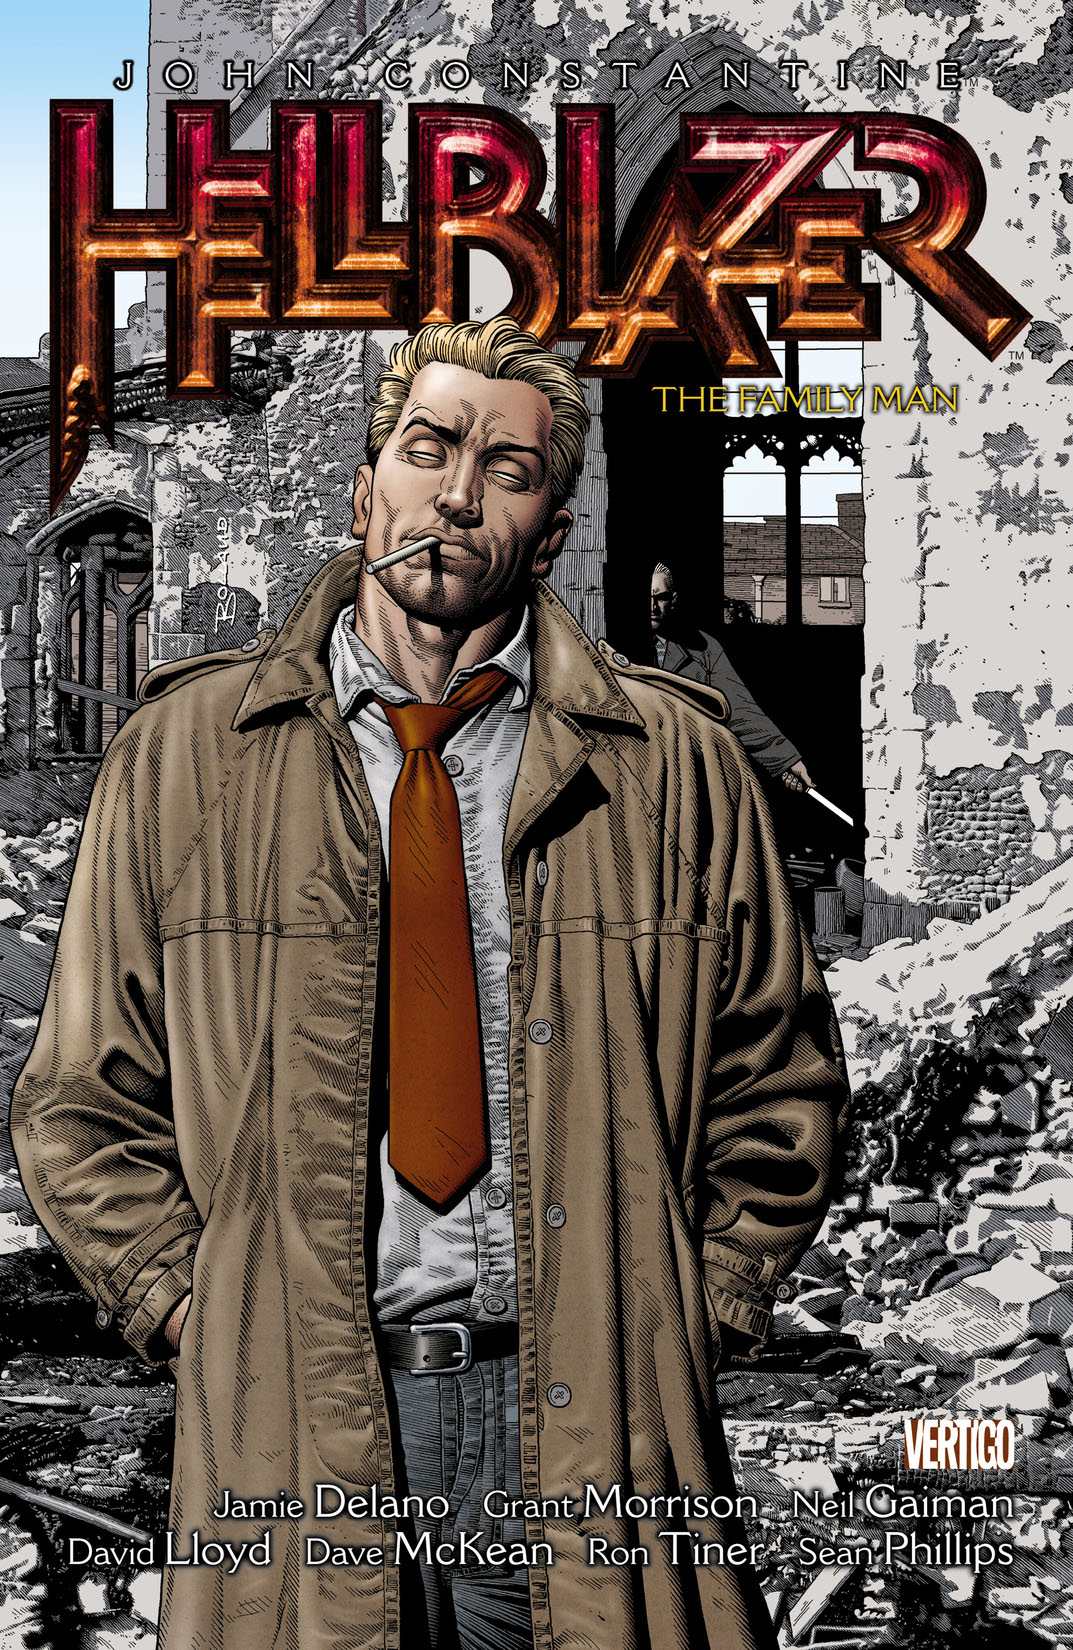 John Constantine, Hellblazer Vol. 4: The Family Man preview images